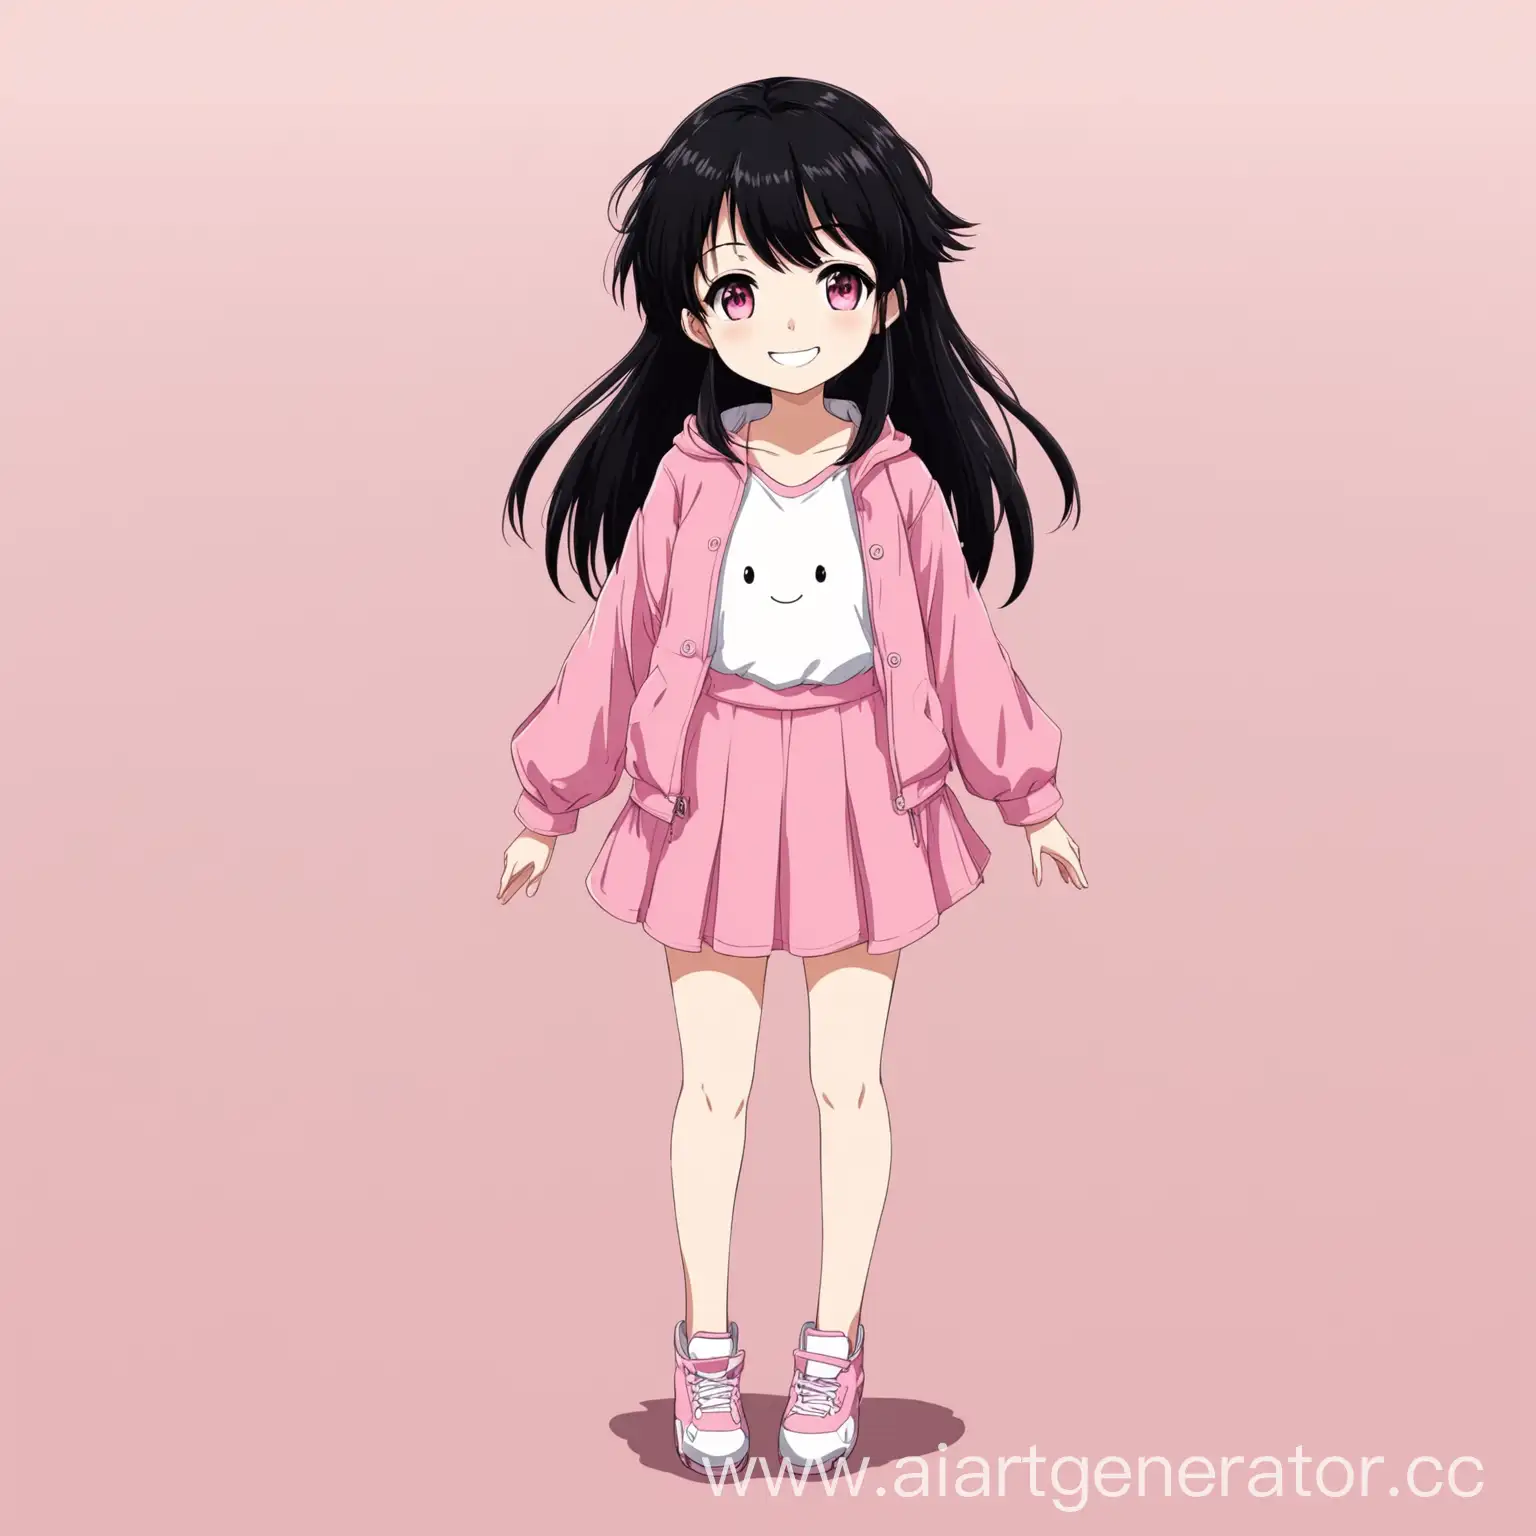 Adorable-Anime-Girl-with-Black-Hair-in-Pink-Outfit-Smiles-for-Avatar-Portrait